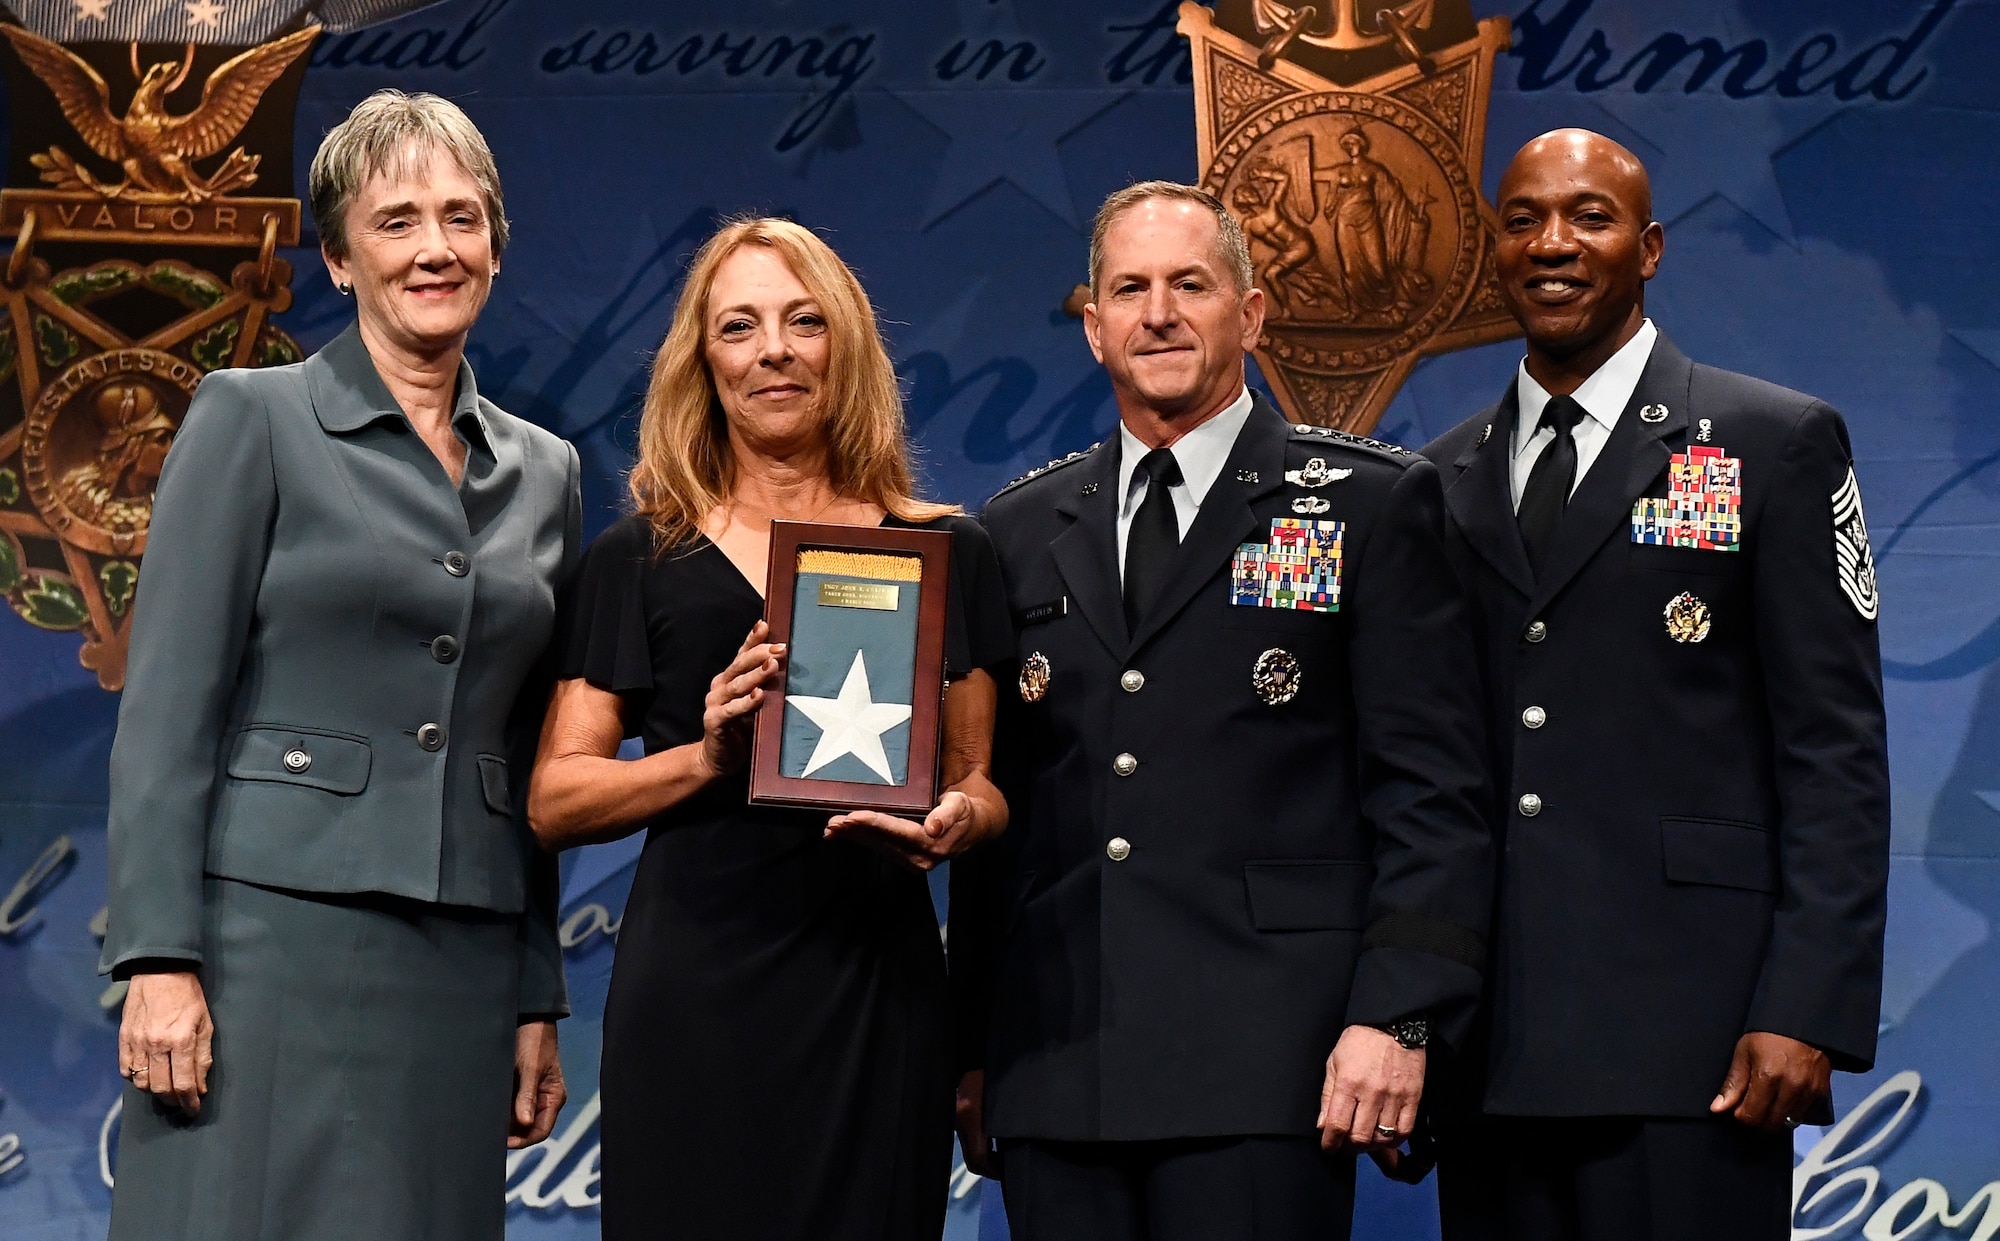 Secretary of the Air Force Heather Wilson, Air Force Chief of Staff Gen. David L. Goldfein and Chief Master Sgt. of the Air Force Kaleth O. Wright present the Medal of Honor Flag to Valerie Nessel, widow of Medal of Honor recipient Tech. Sgt. John Chapman